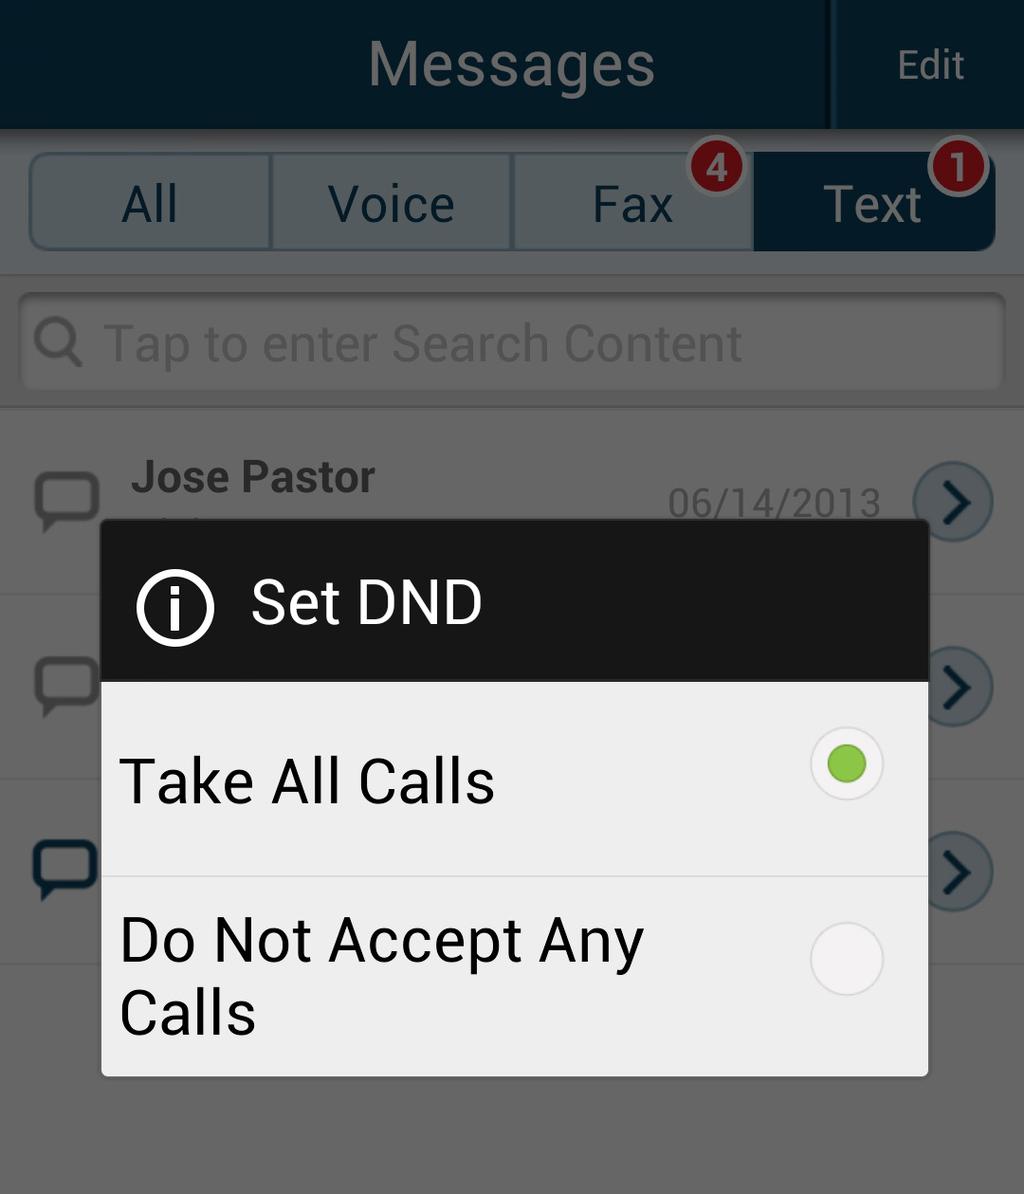 Do Not Disturb (DND) When you re busy and don t want to be interrupted, use Do Not Disturb to forward calls directly to voicemail.